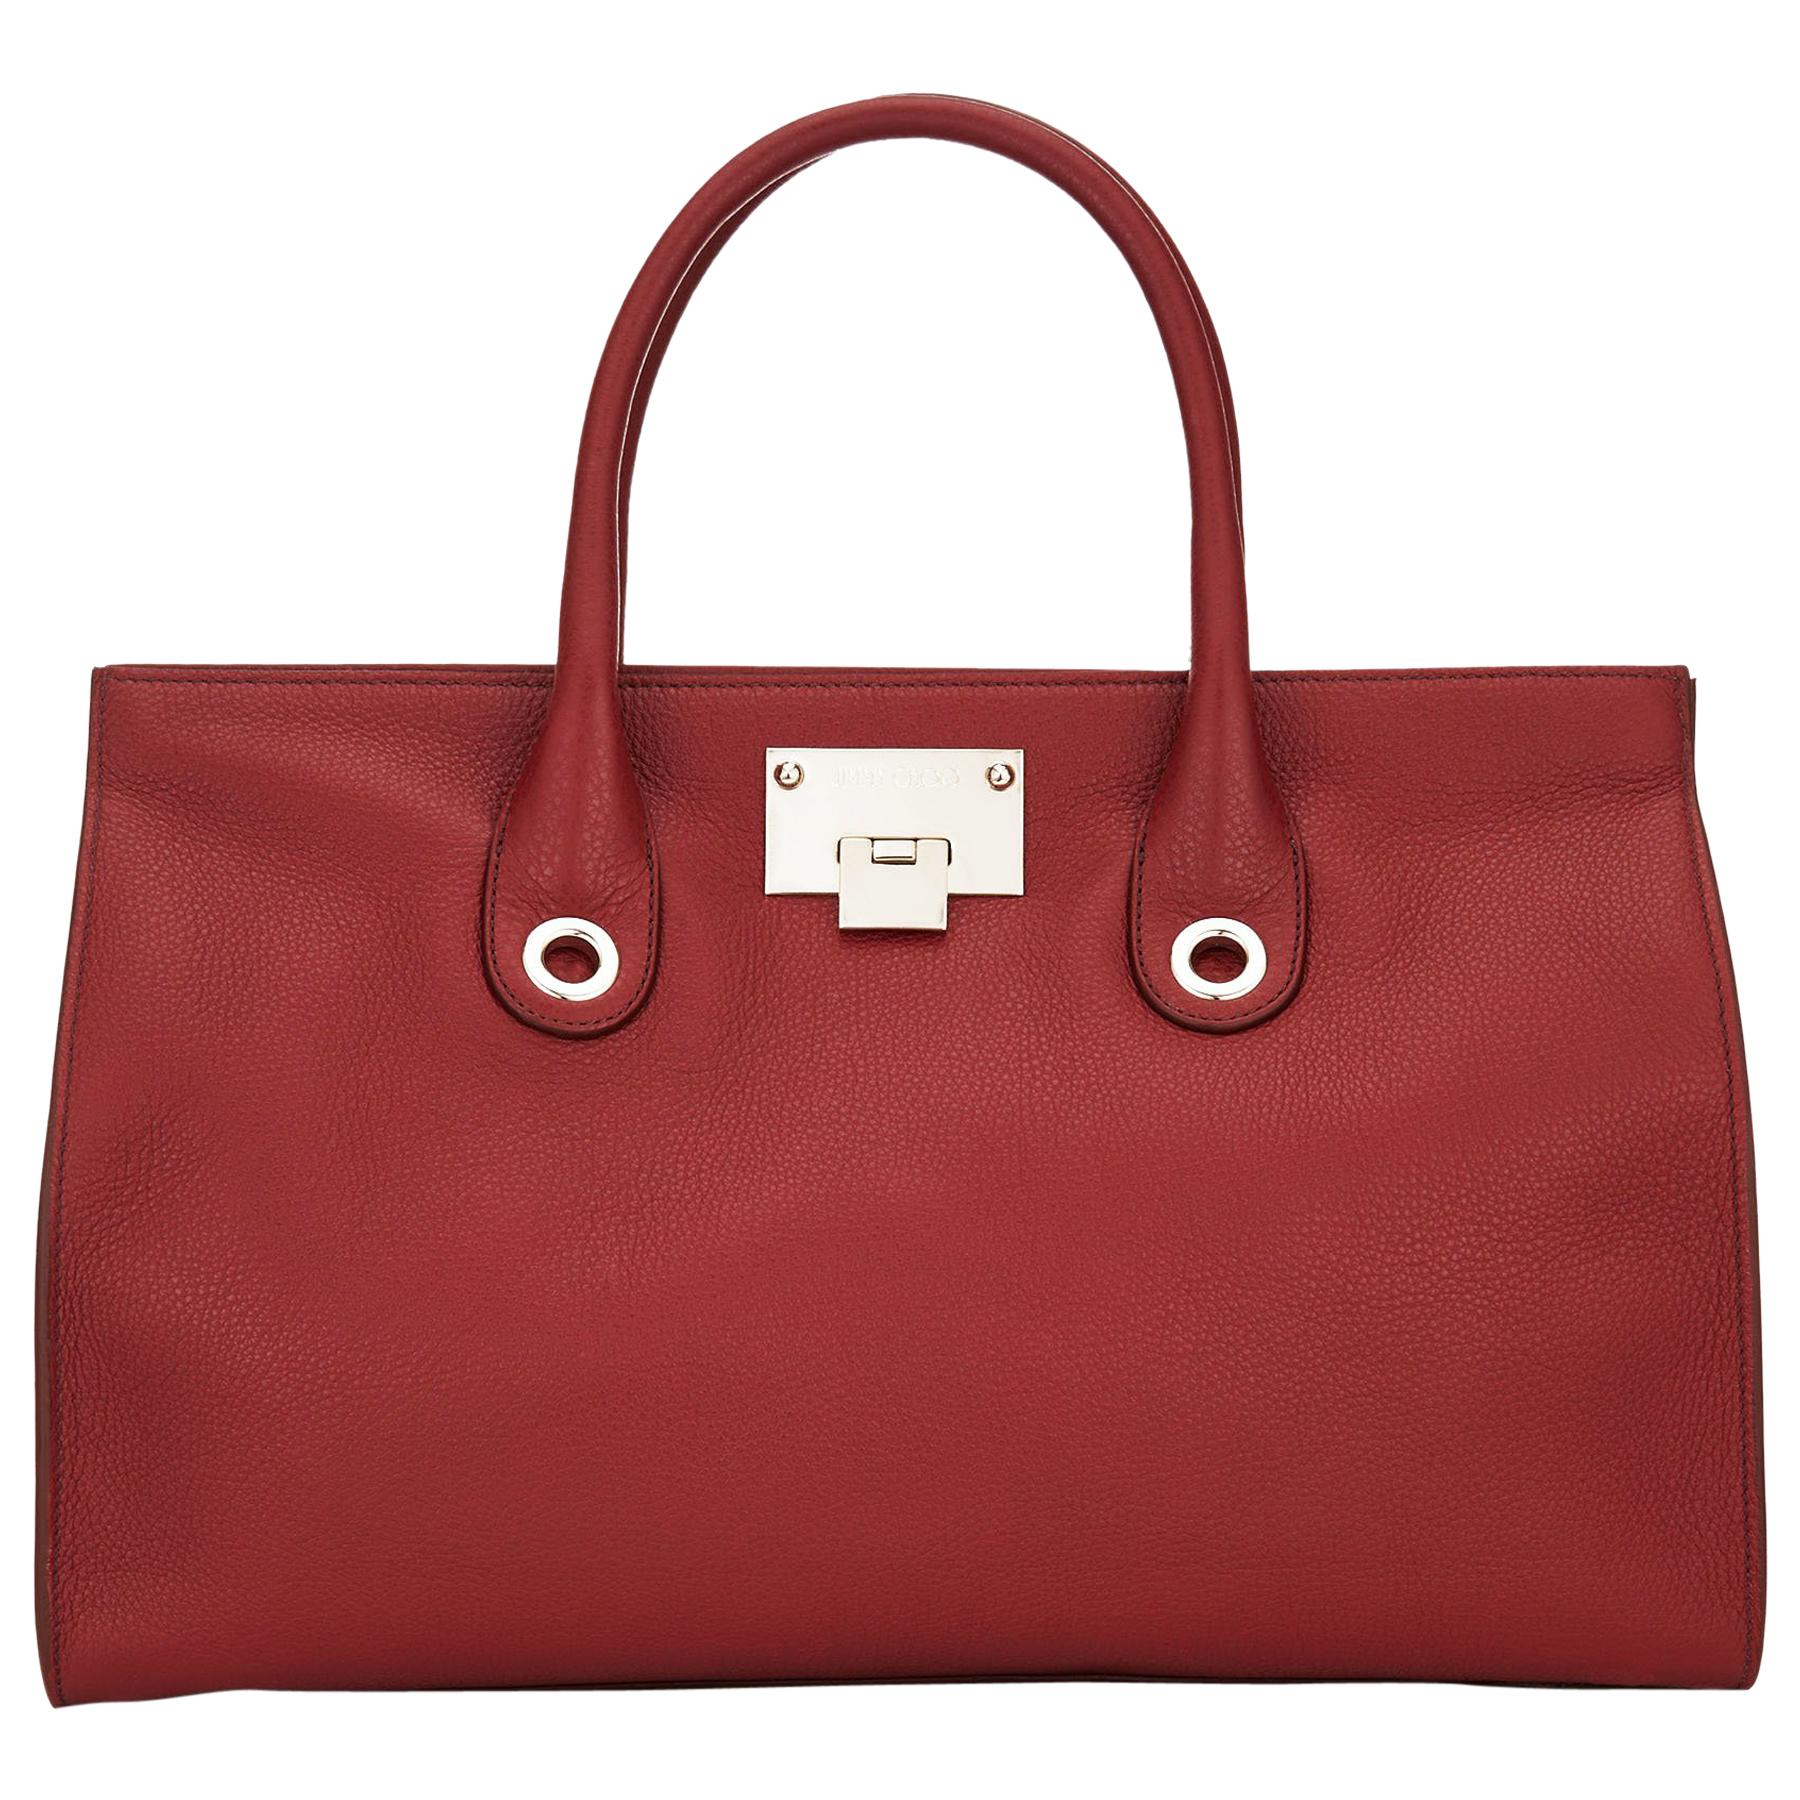 New Jimmy Choo *Riley* Red Grainy Calf Leather Tote Cross-body Large ...